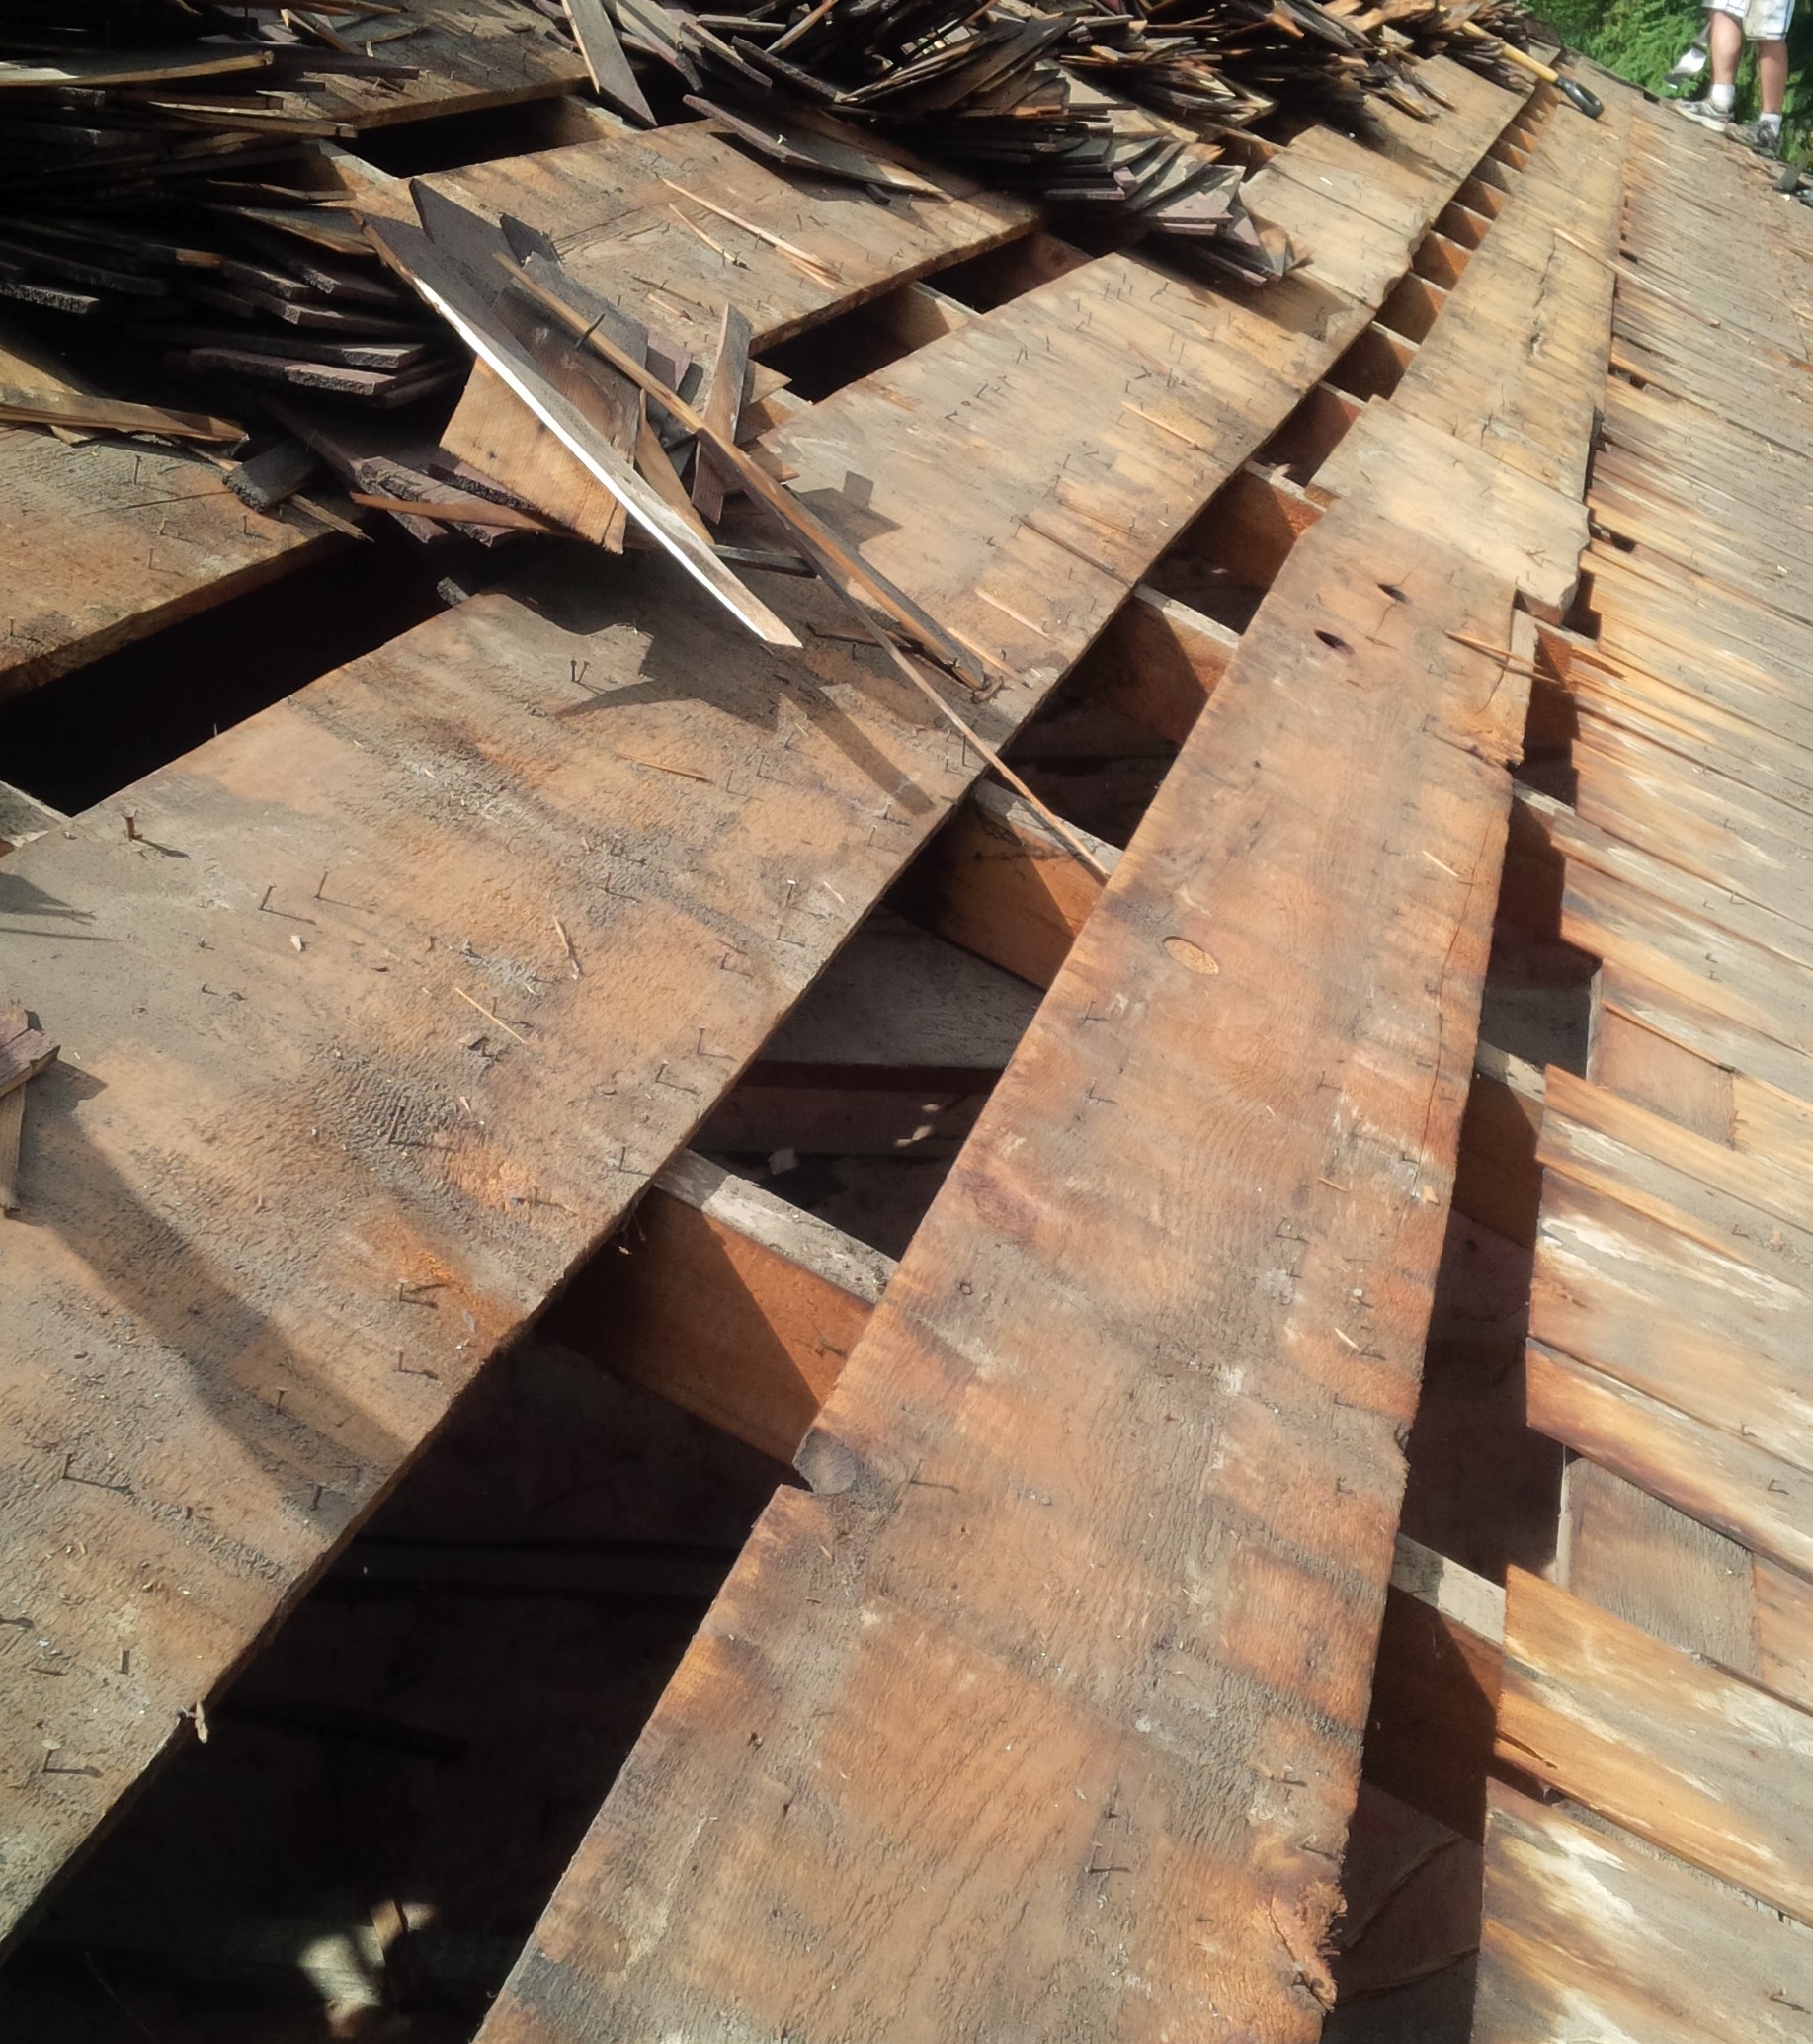 wood shake tear off reveals gaps in roof deck